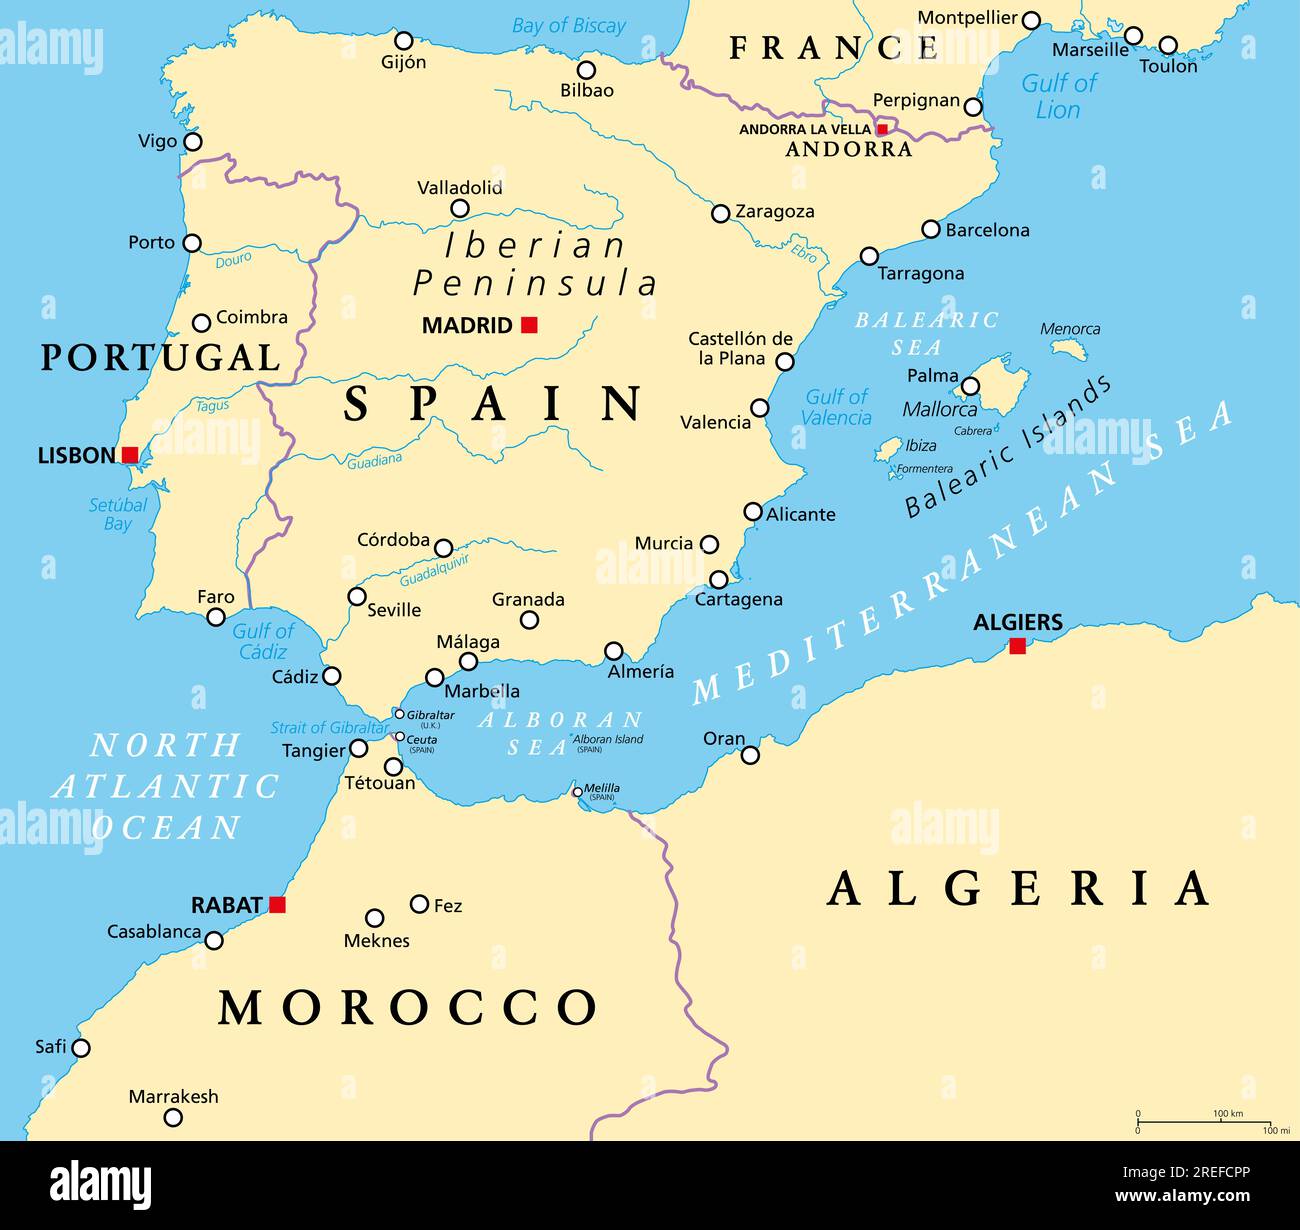 West Mediterranean, political map. Iberian Peninsula, bordered by North Atlantic and Mediterranean Sea, separated from Africa by Strait of Gibraltar. Stock Photo